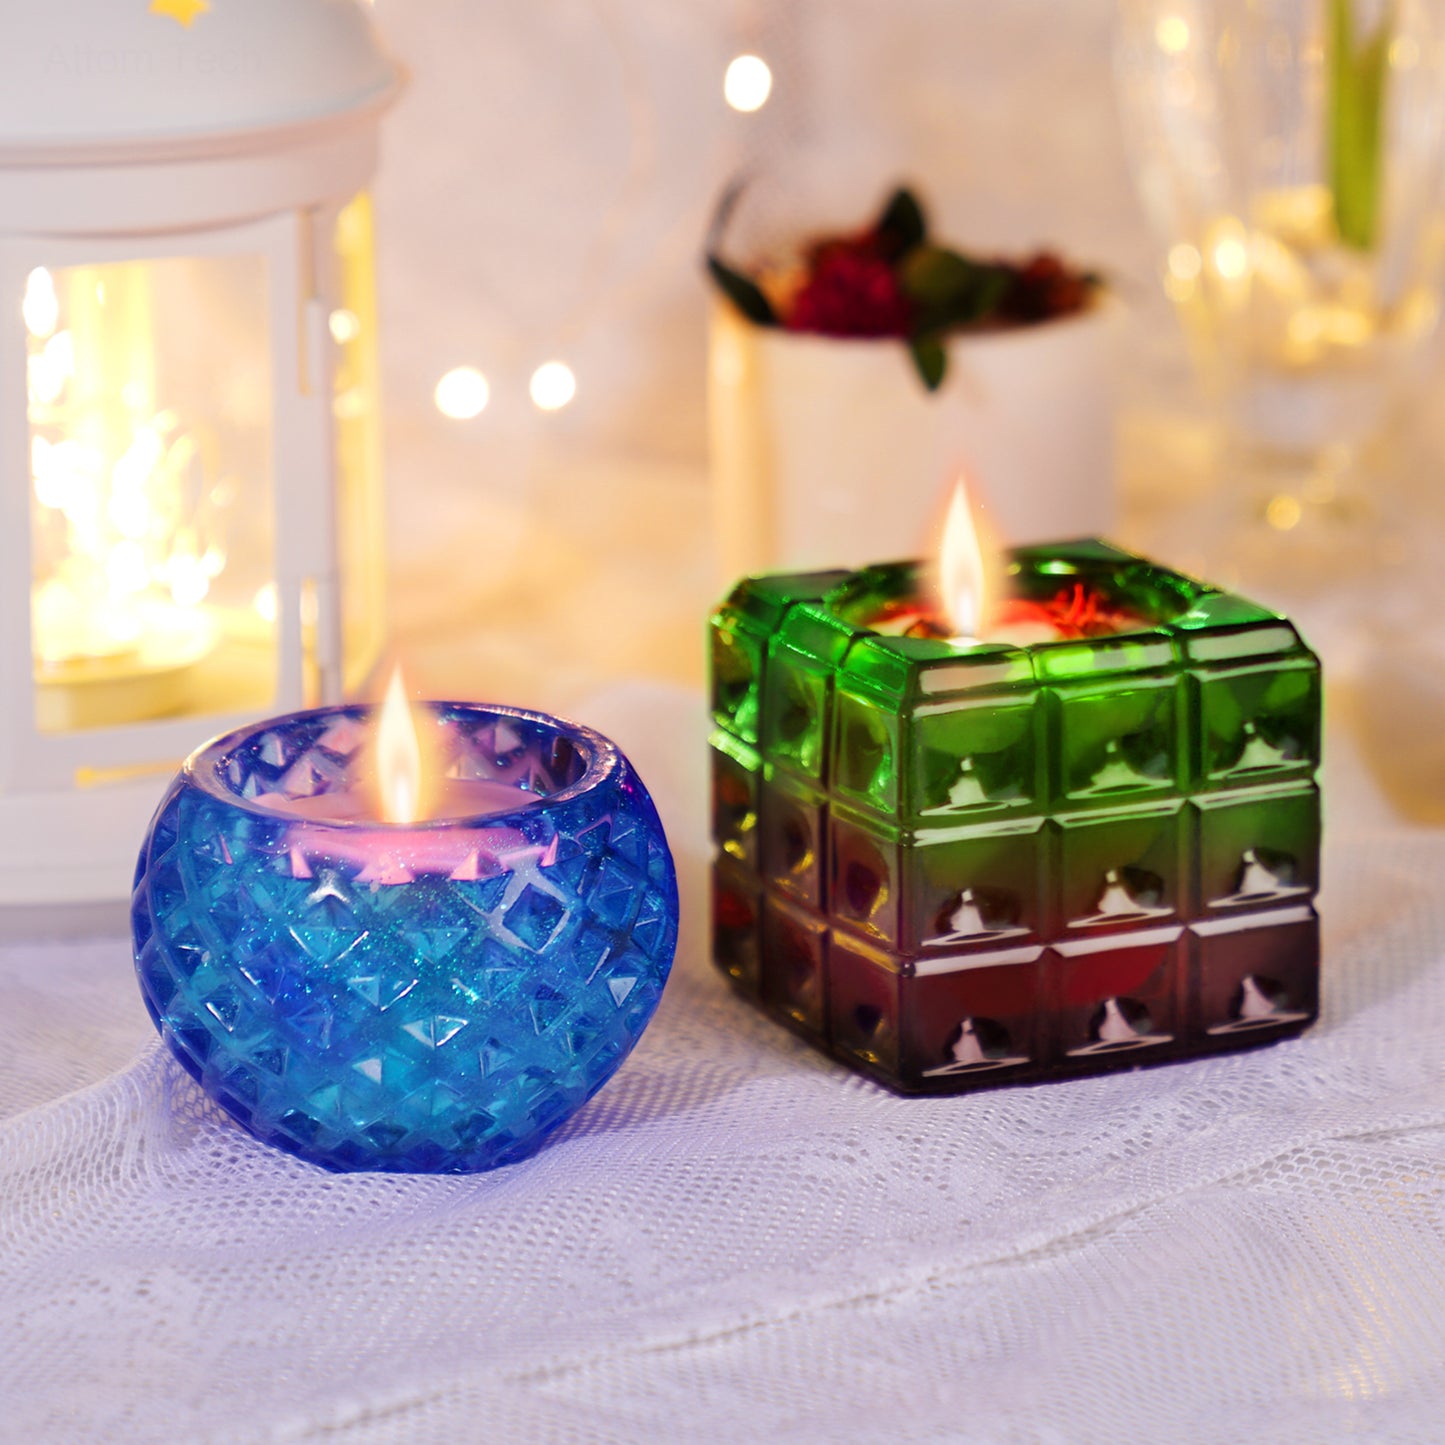 DIY Epoxy Resin Casting Candle Holder Silicone Mold Kit with Silver Glitter Pa